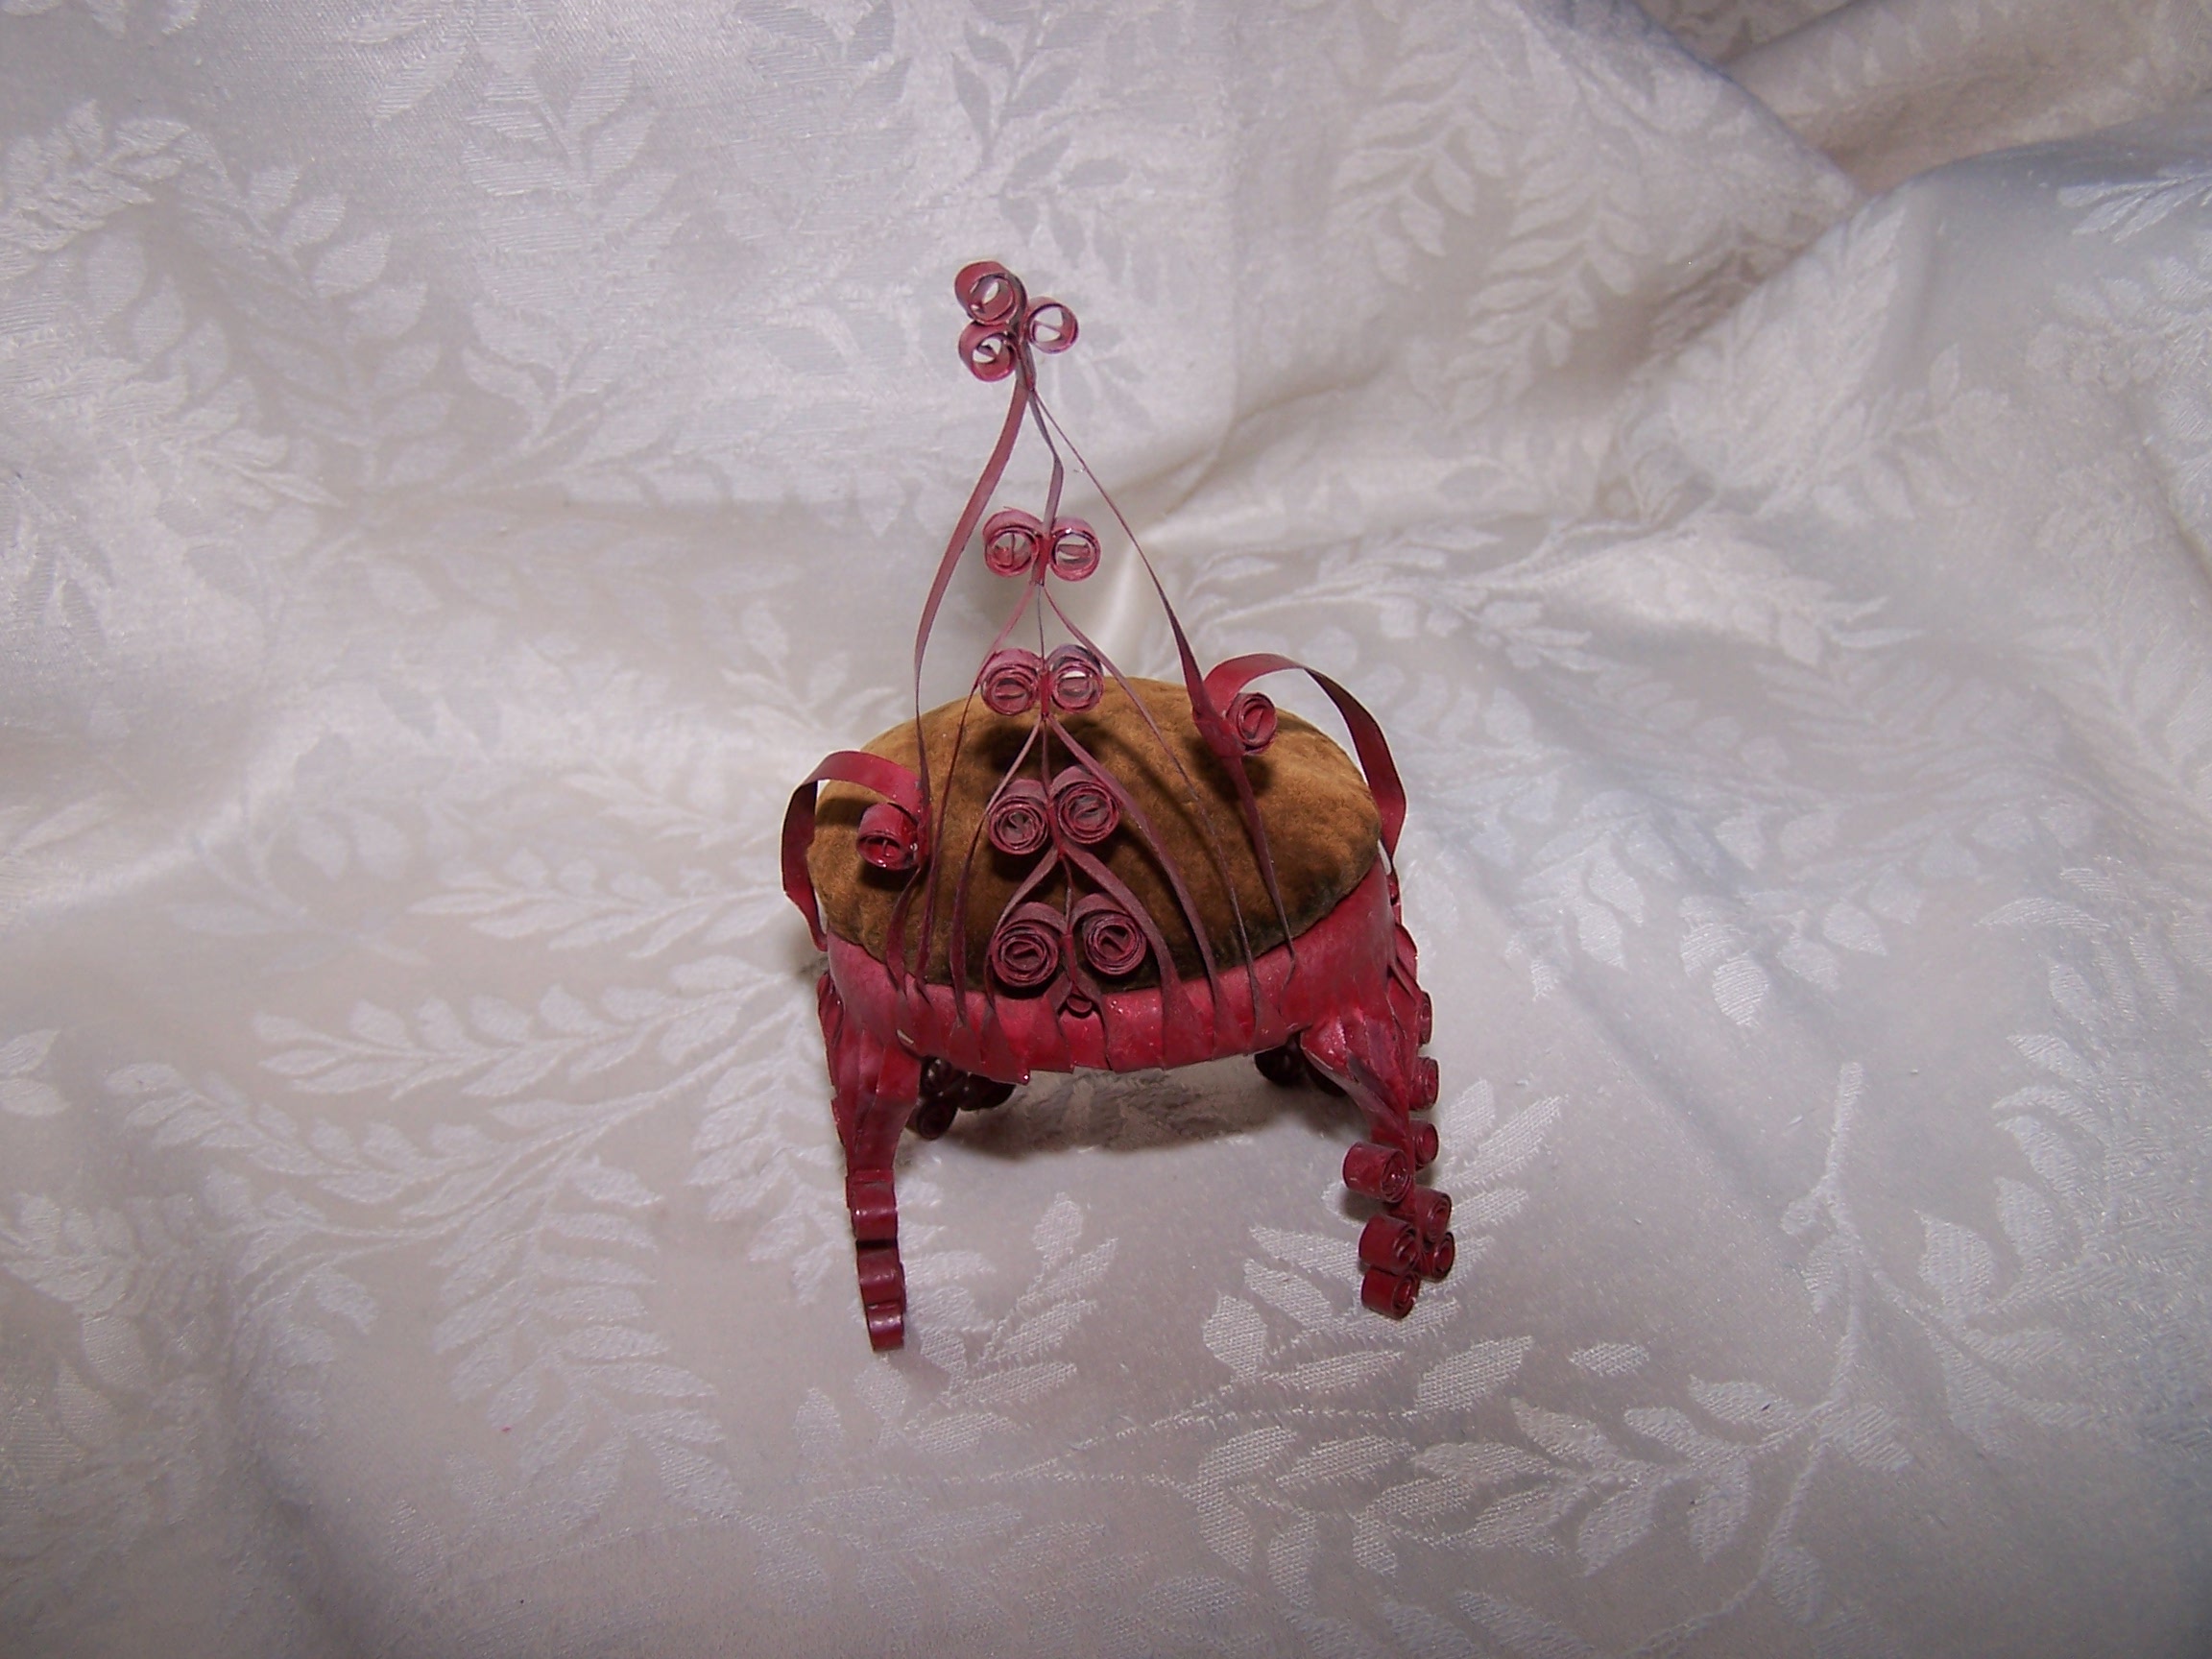 Image 2 of Quilled Pin Cushion Chair, Red, Folk Art, Vintage